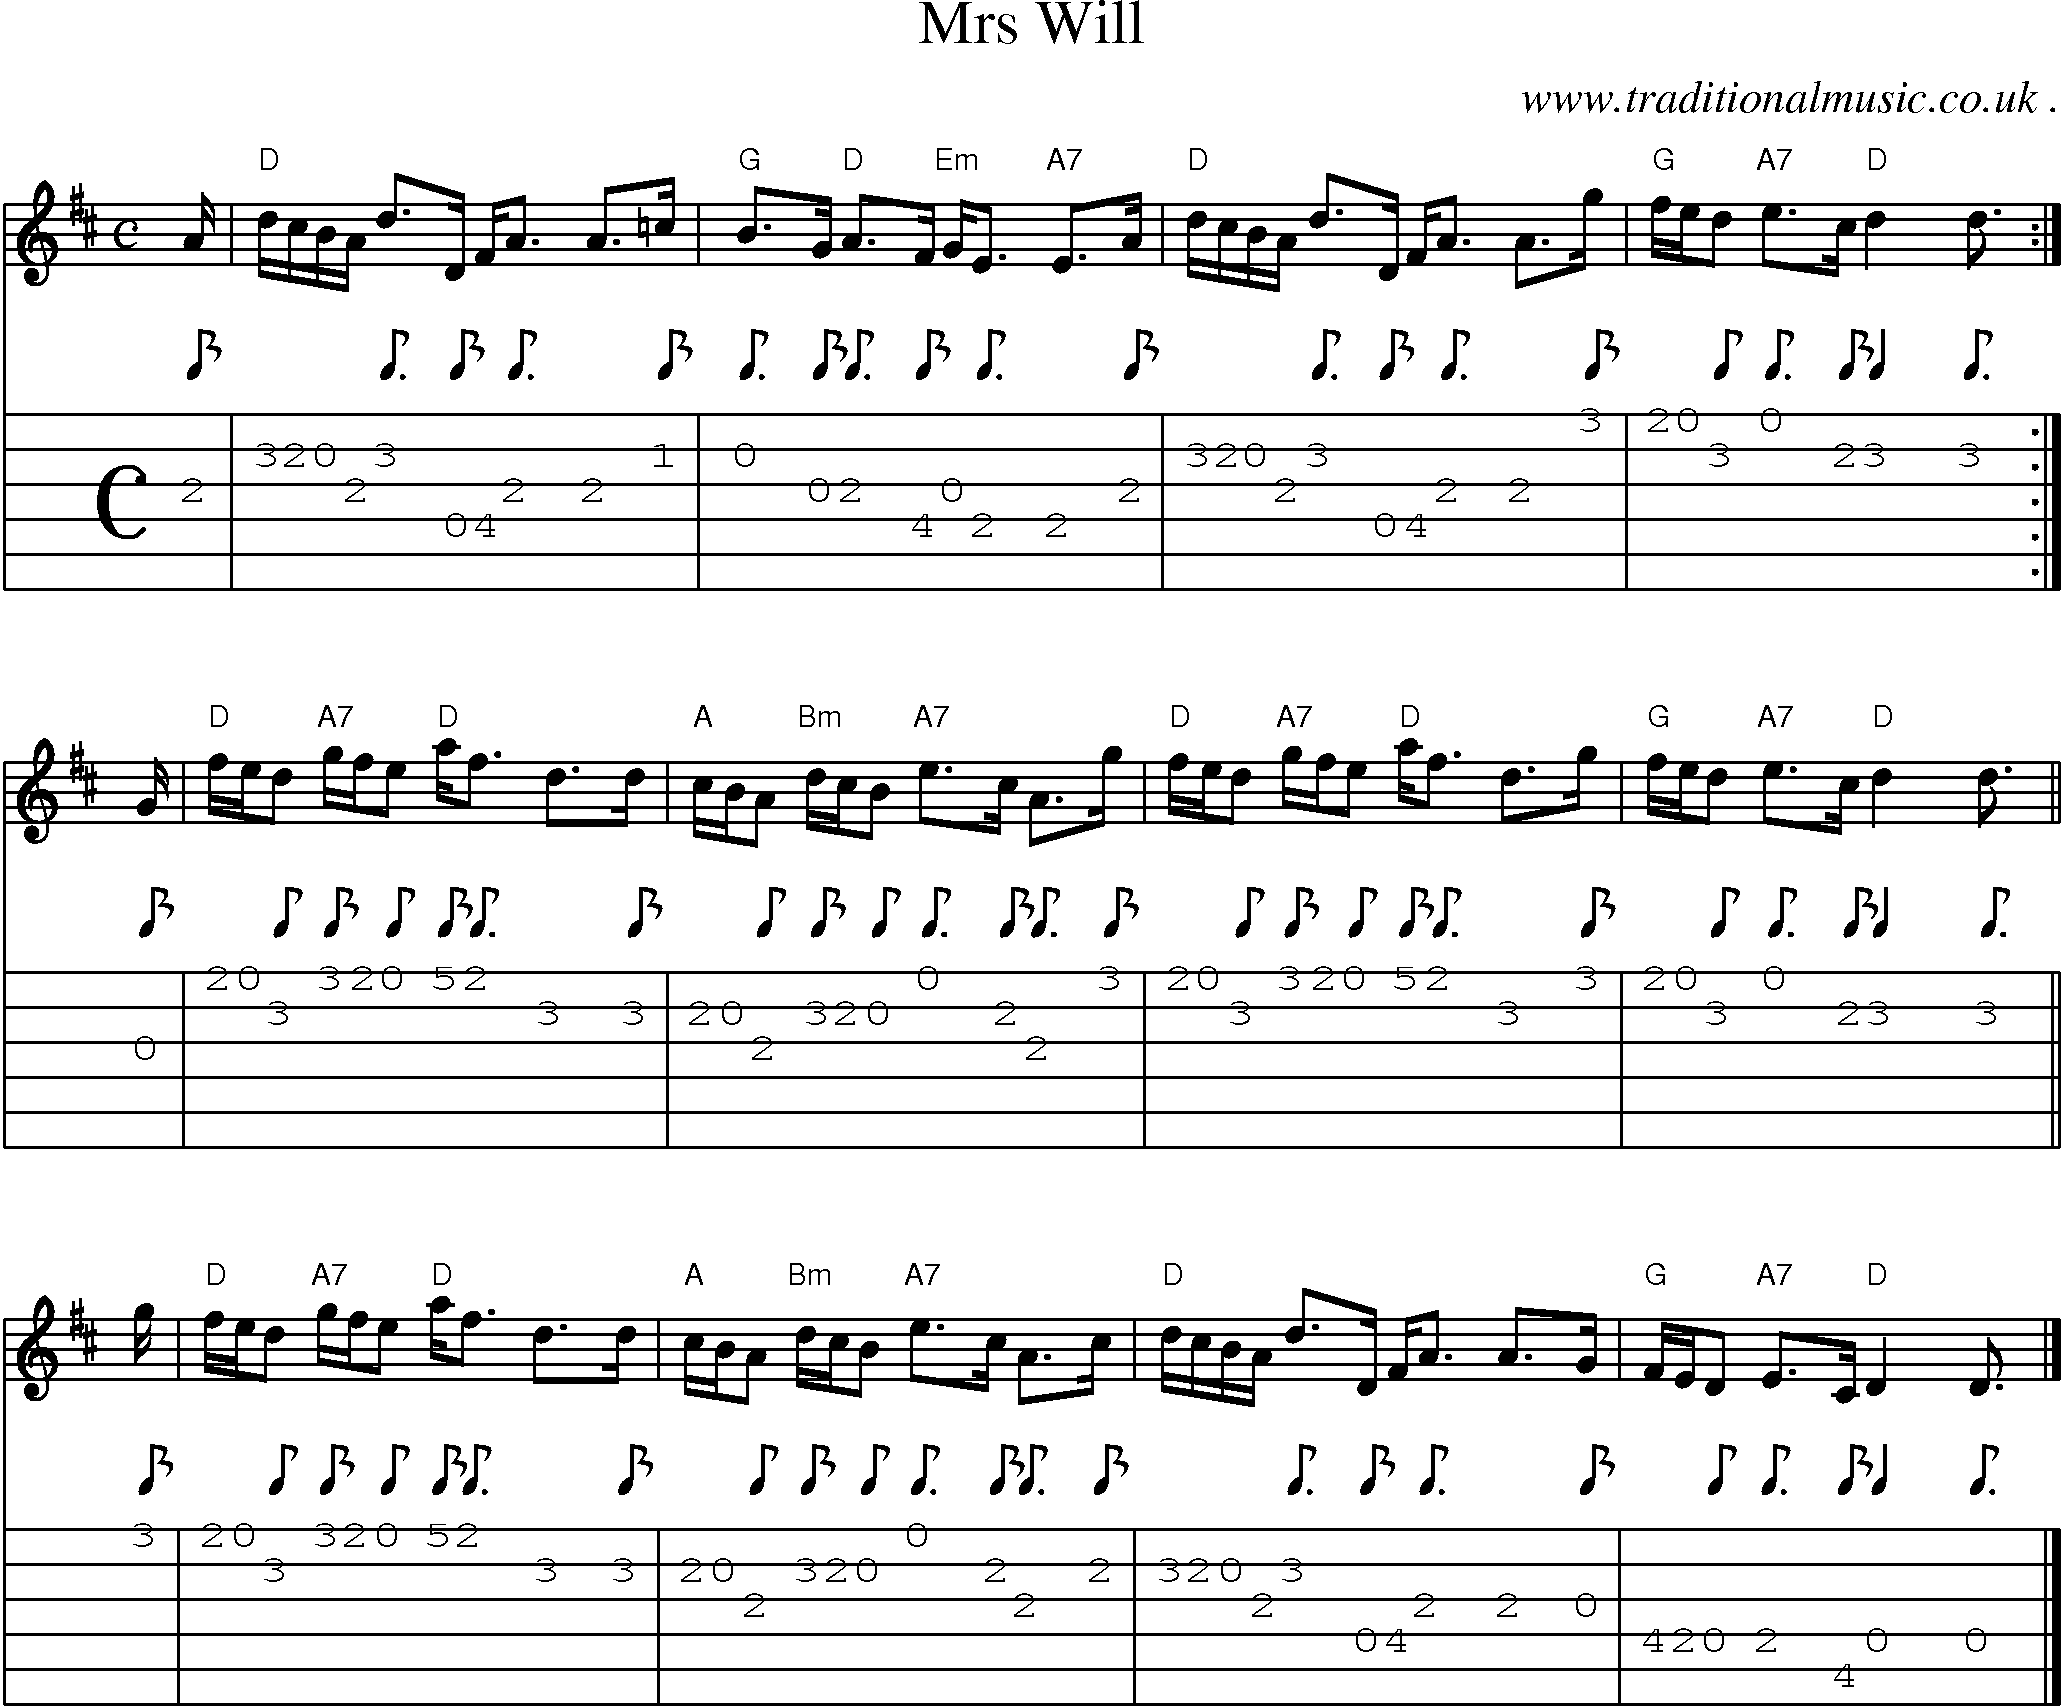 Sheet-music  score, Chords and Guitar Tabs for Mrs Will